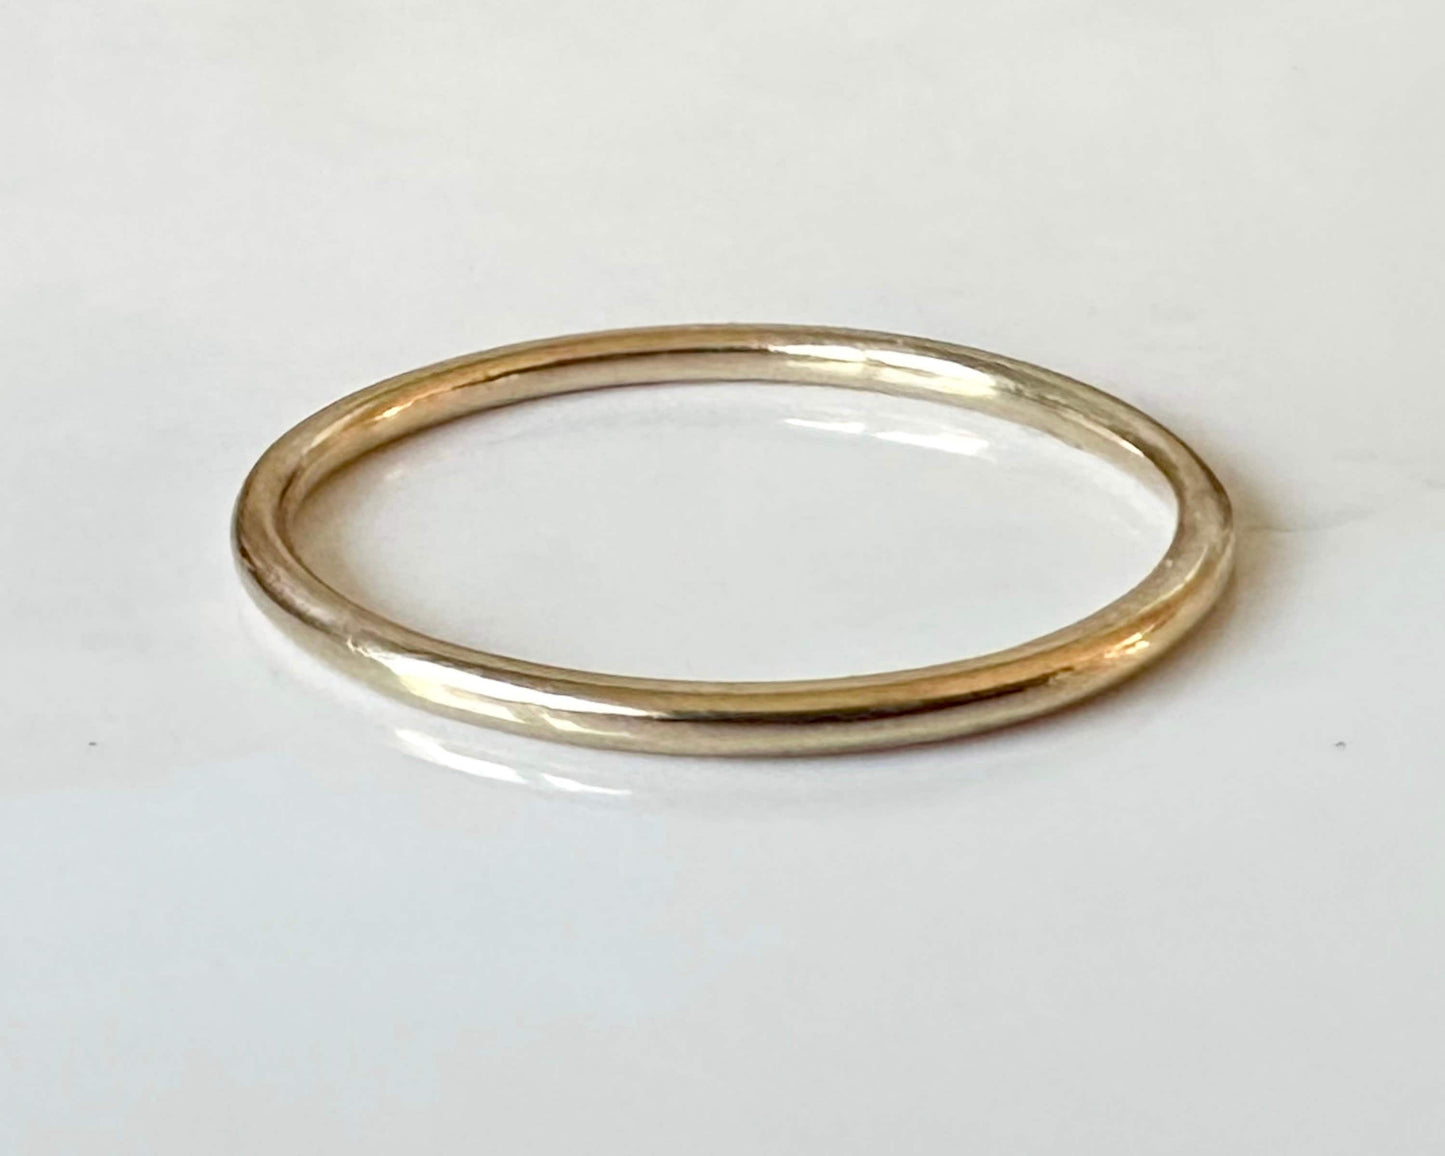 Solid 9ct Gold and 925 Sterling Silver Ring Set, Hallmarked 1.2mm, 1.5mm, 1.8mm Gold and Silver Plain Ring Band Set of Two